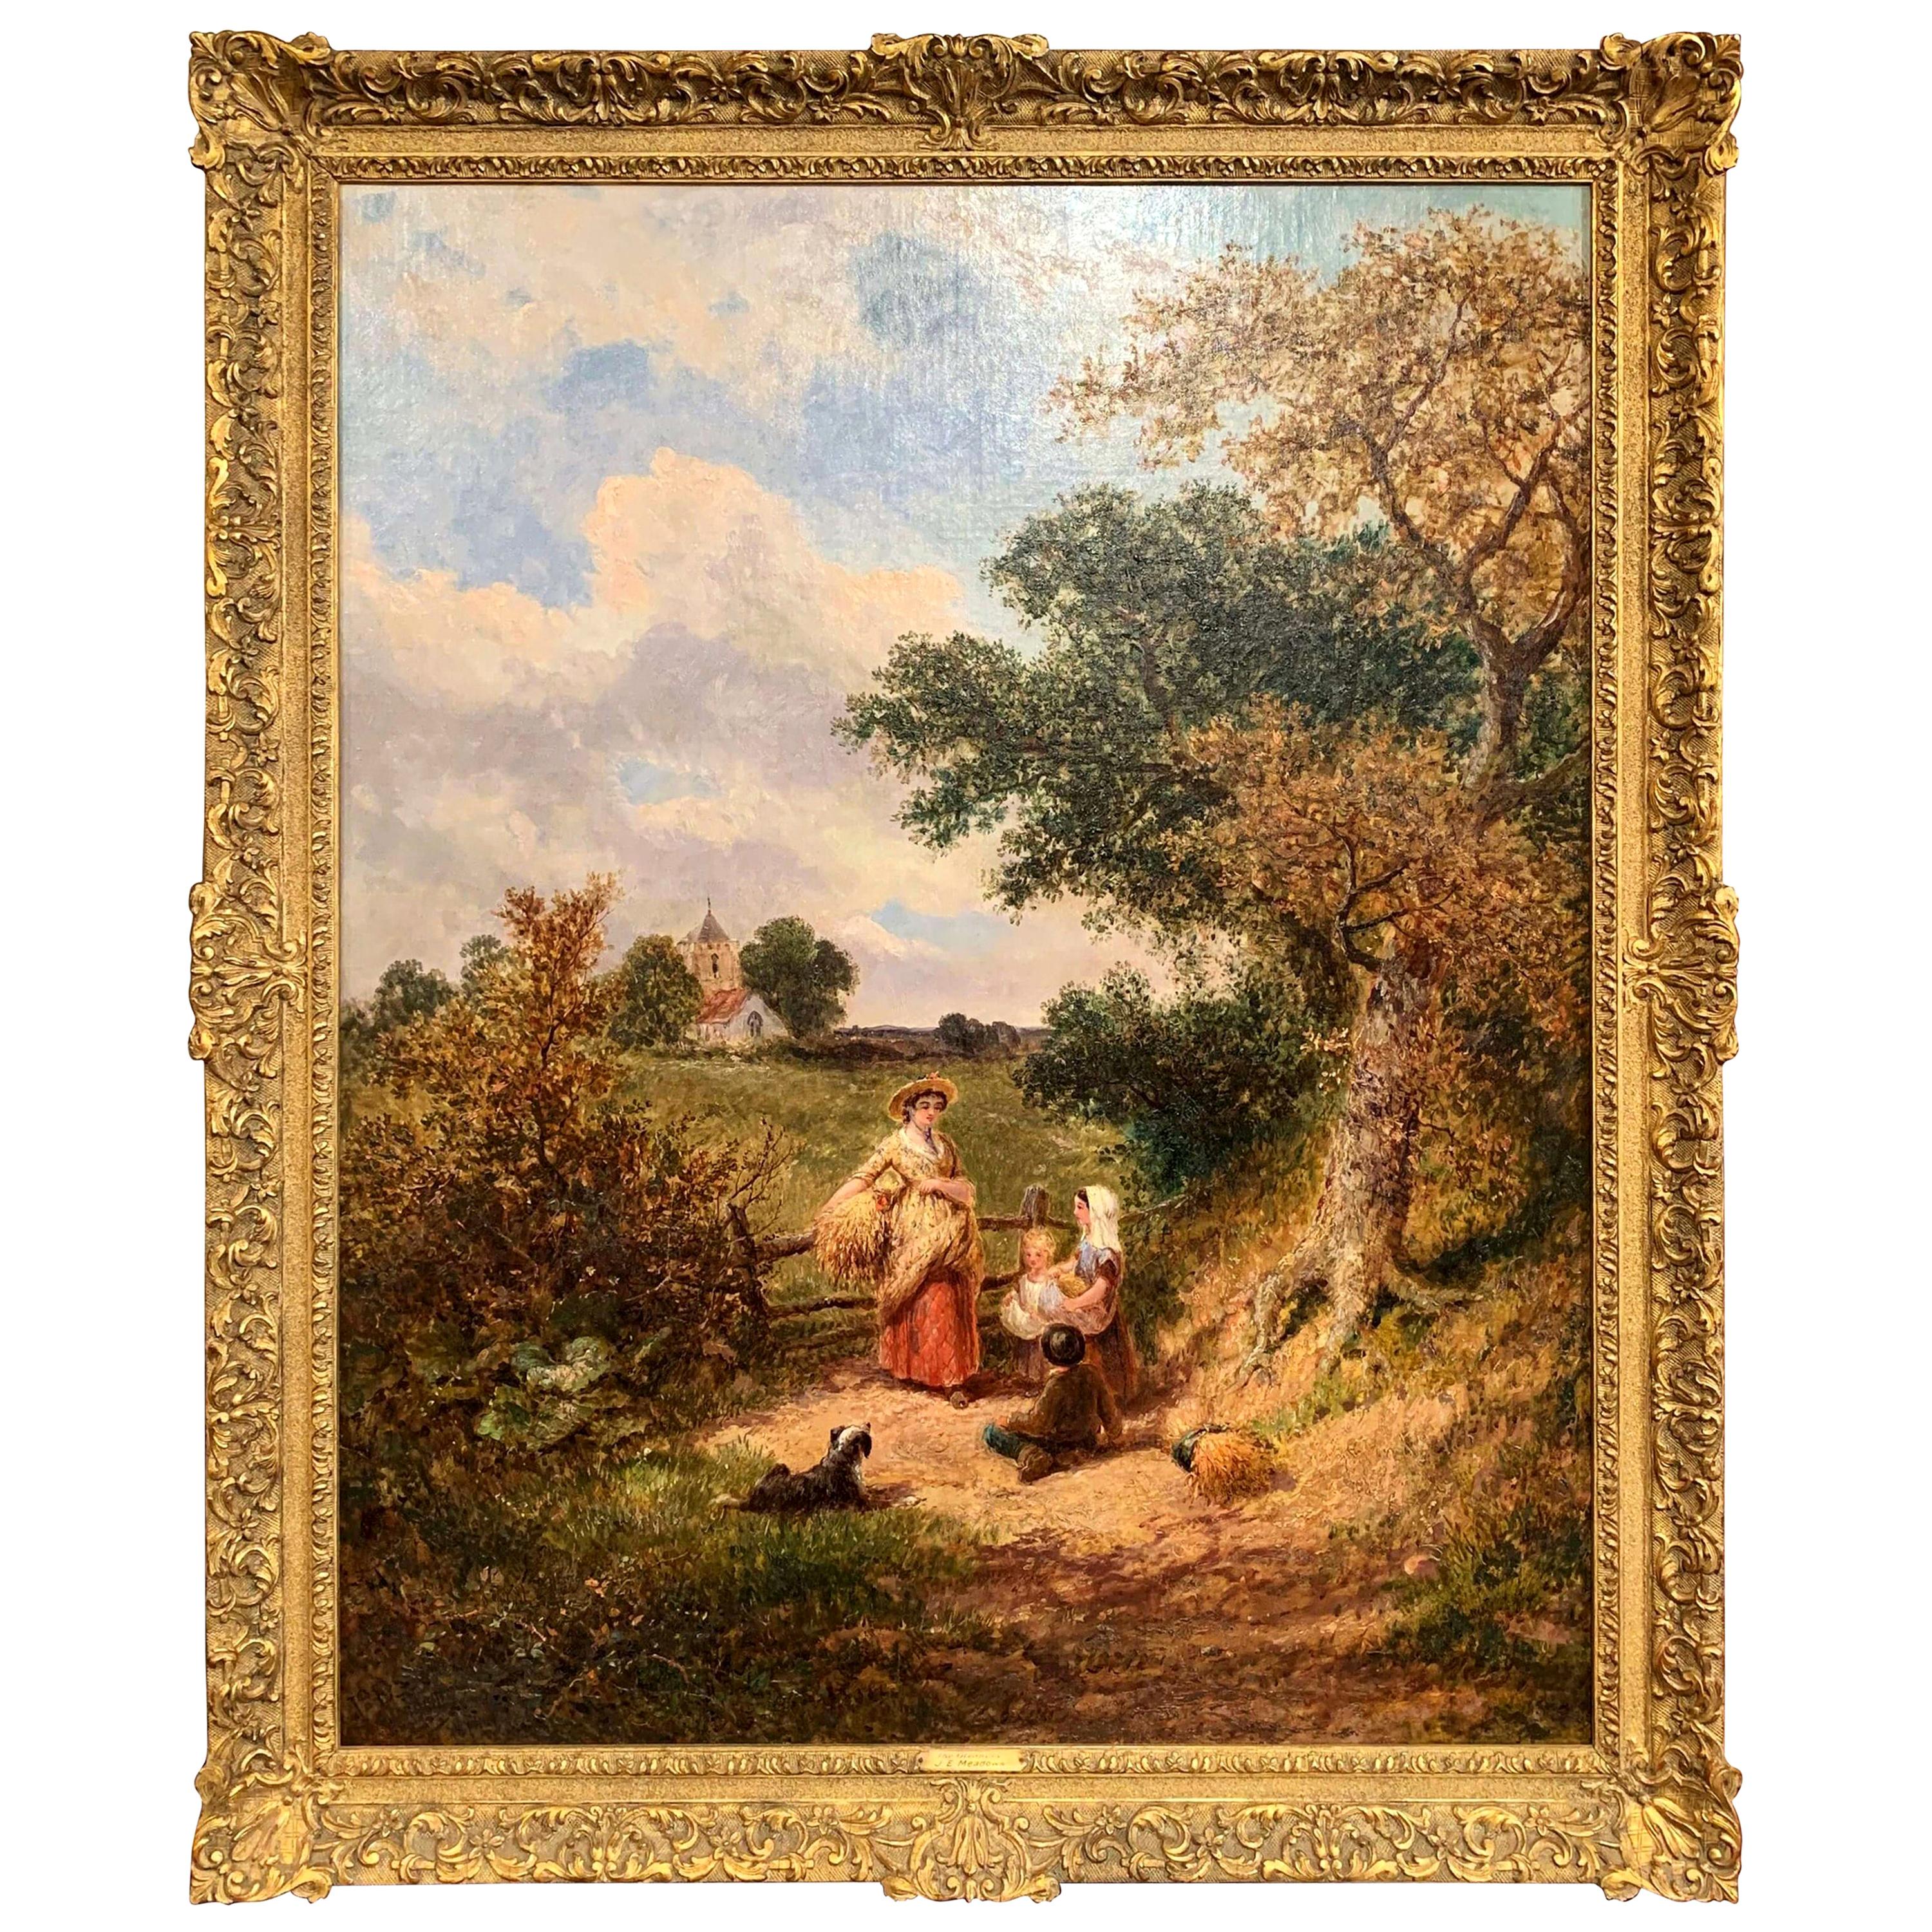 19th Century English Oil Painting "The Gleaners" Signed J. E. Meadows Dated 1874